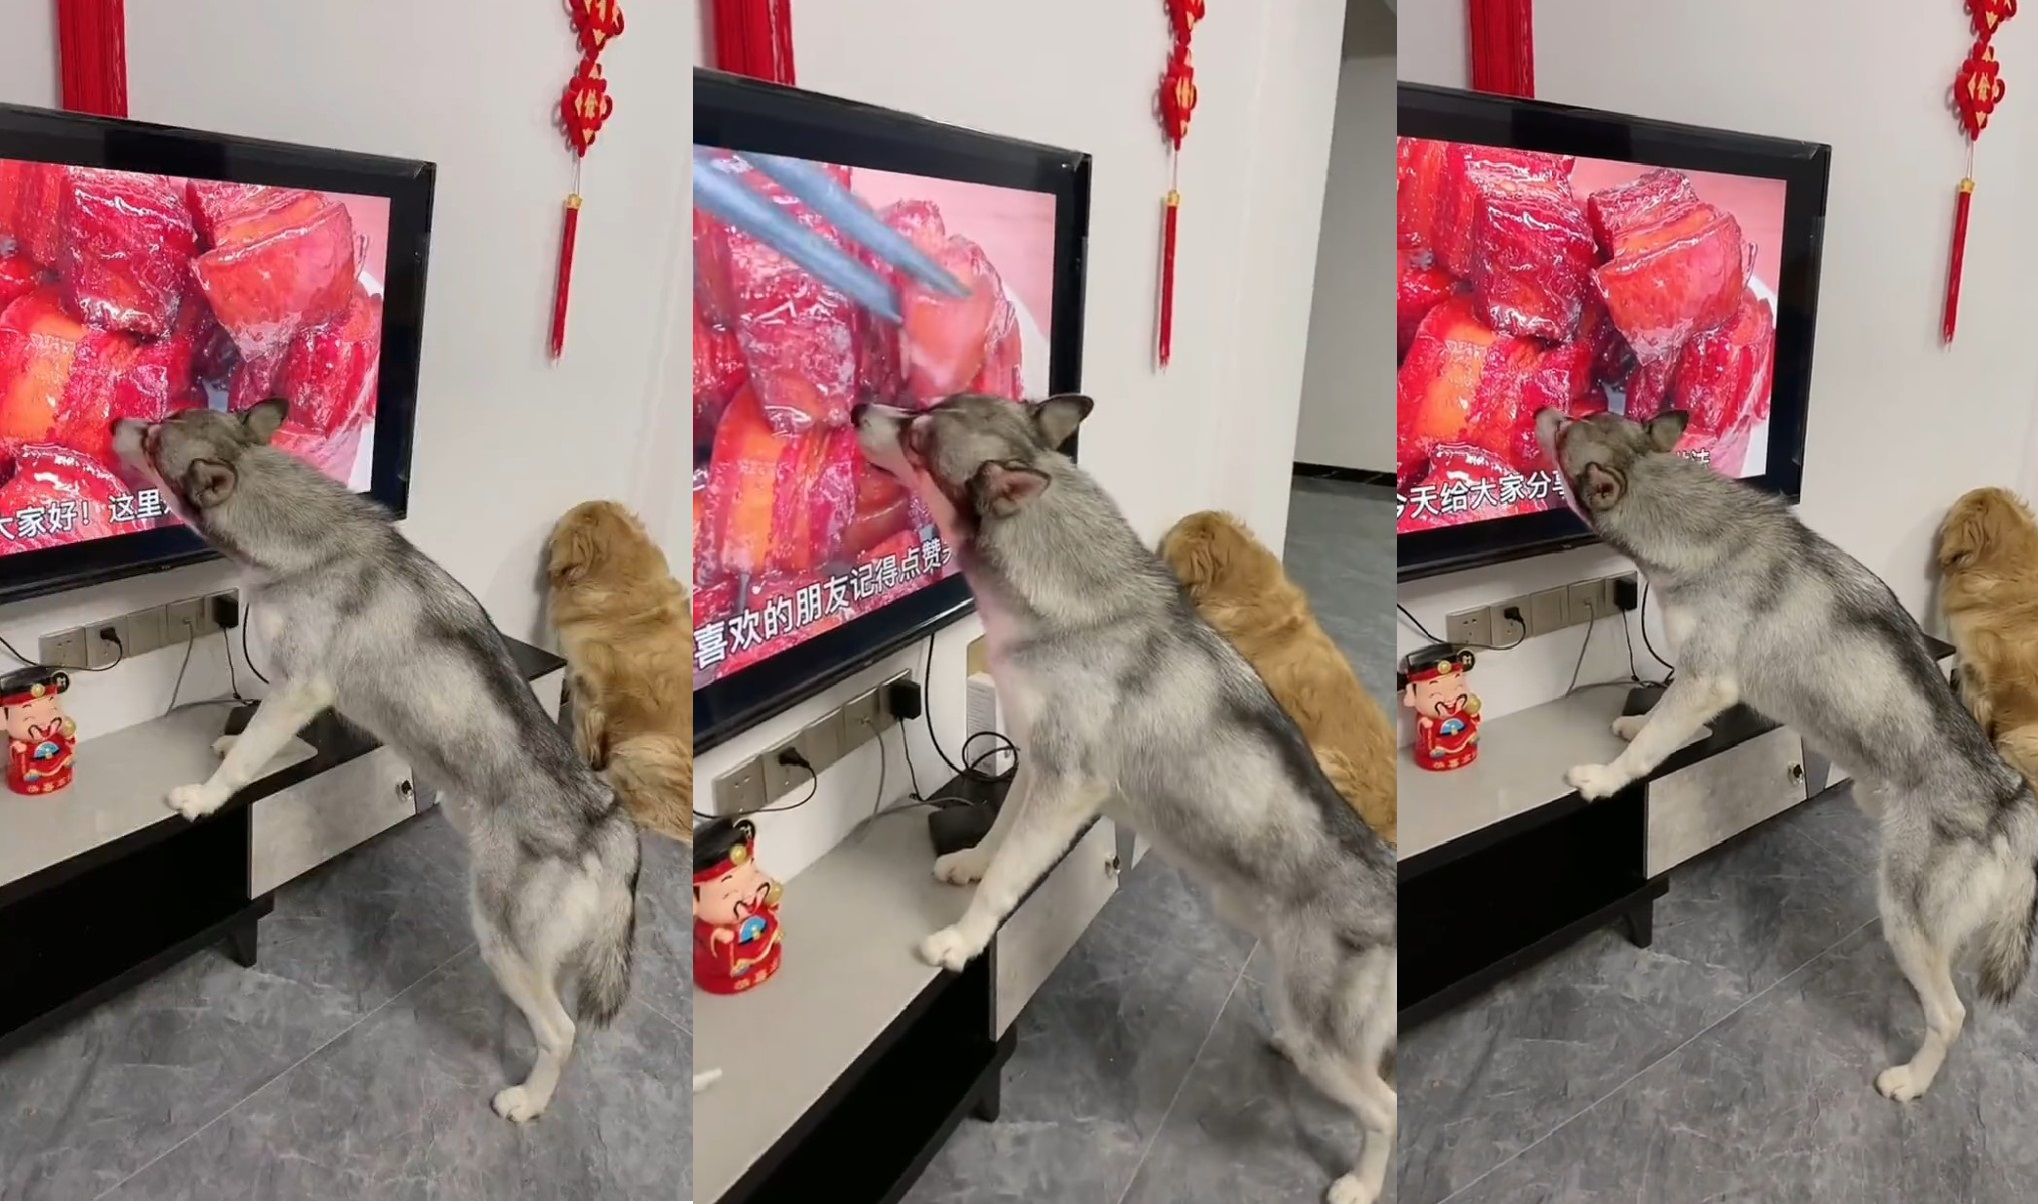 The Dog Licks a Juicy Steak But Its Inside The Television, The Video Clip Has 9 Million Views. [Video]